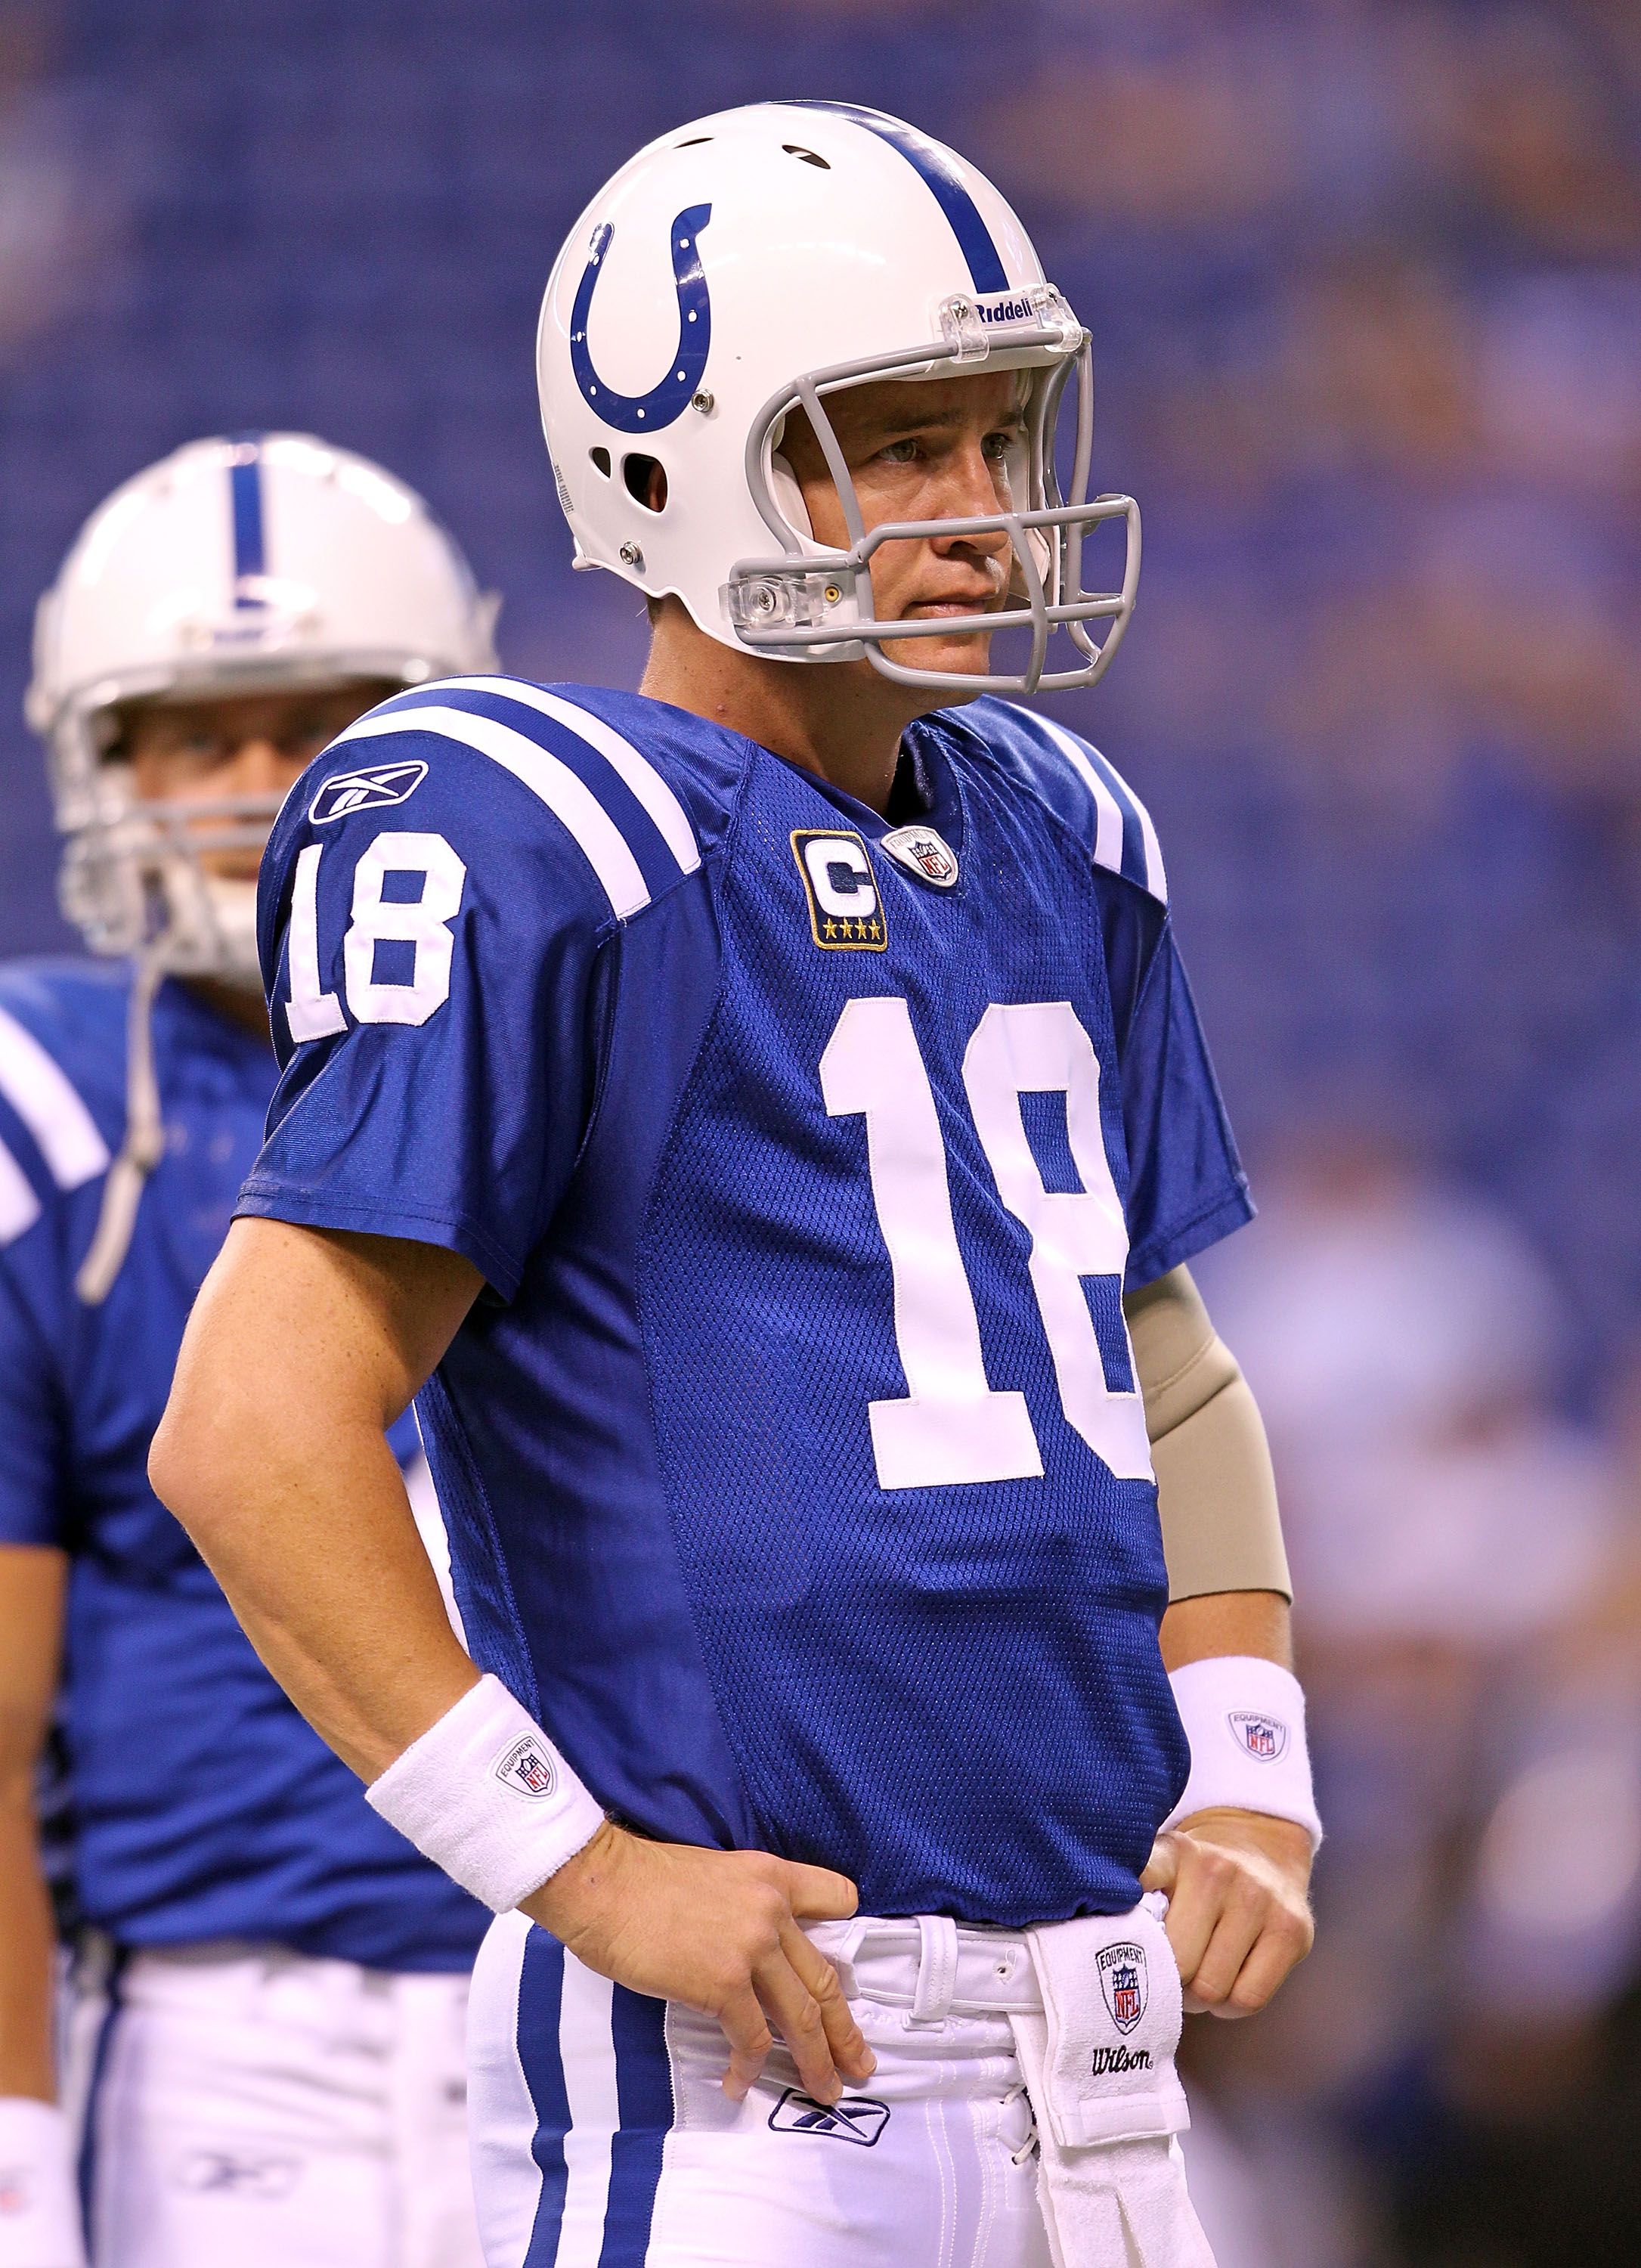 INDIANAPOLIS - SEPTEMBER 19:  Peyton Manning #18 of the Indianapolis Colts waits to throw the ball during  warmups before the NFL game against the New York Giants  at Lucas Oil Stadium on September 19, 2010 in Indianapolis, Indiana.  (Photo by Andy Lyons/